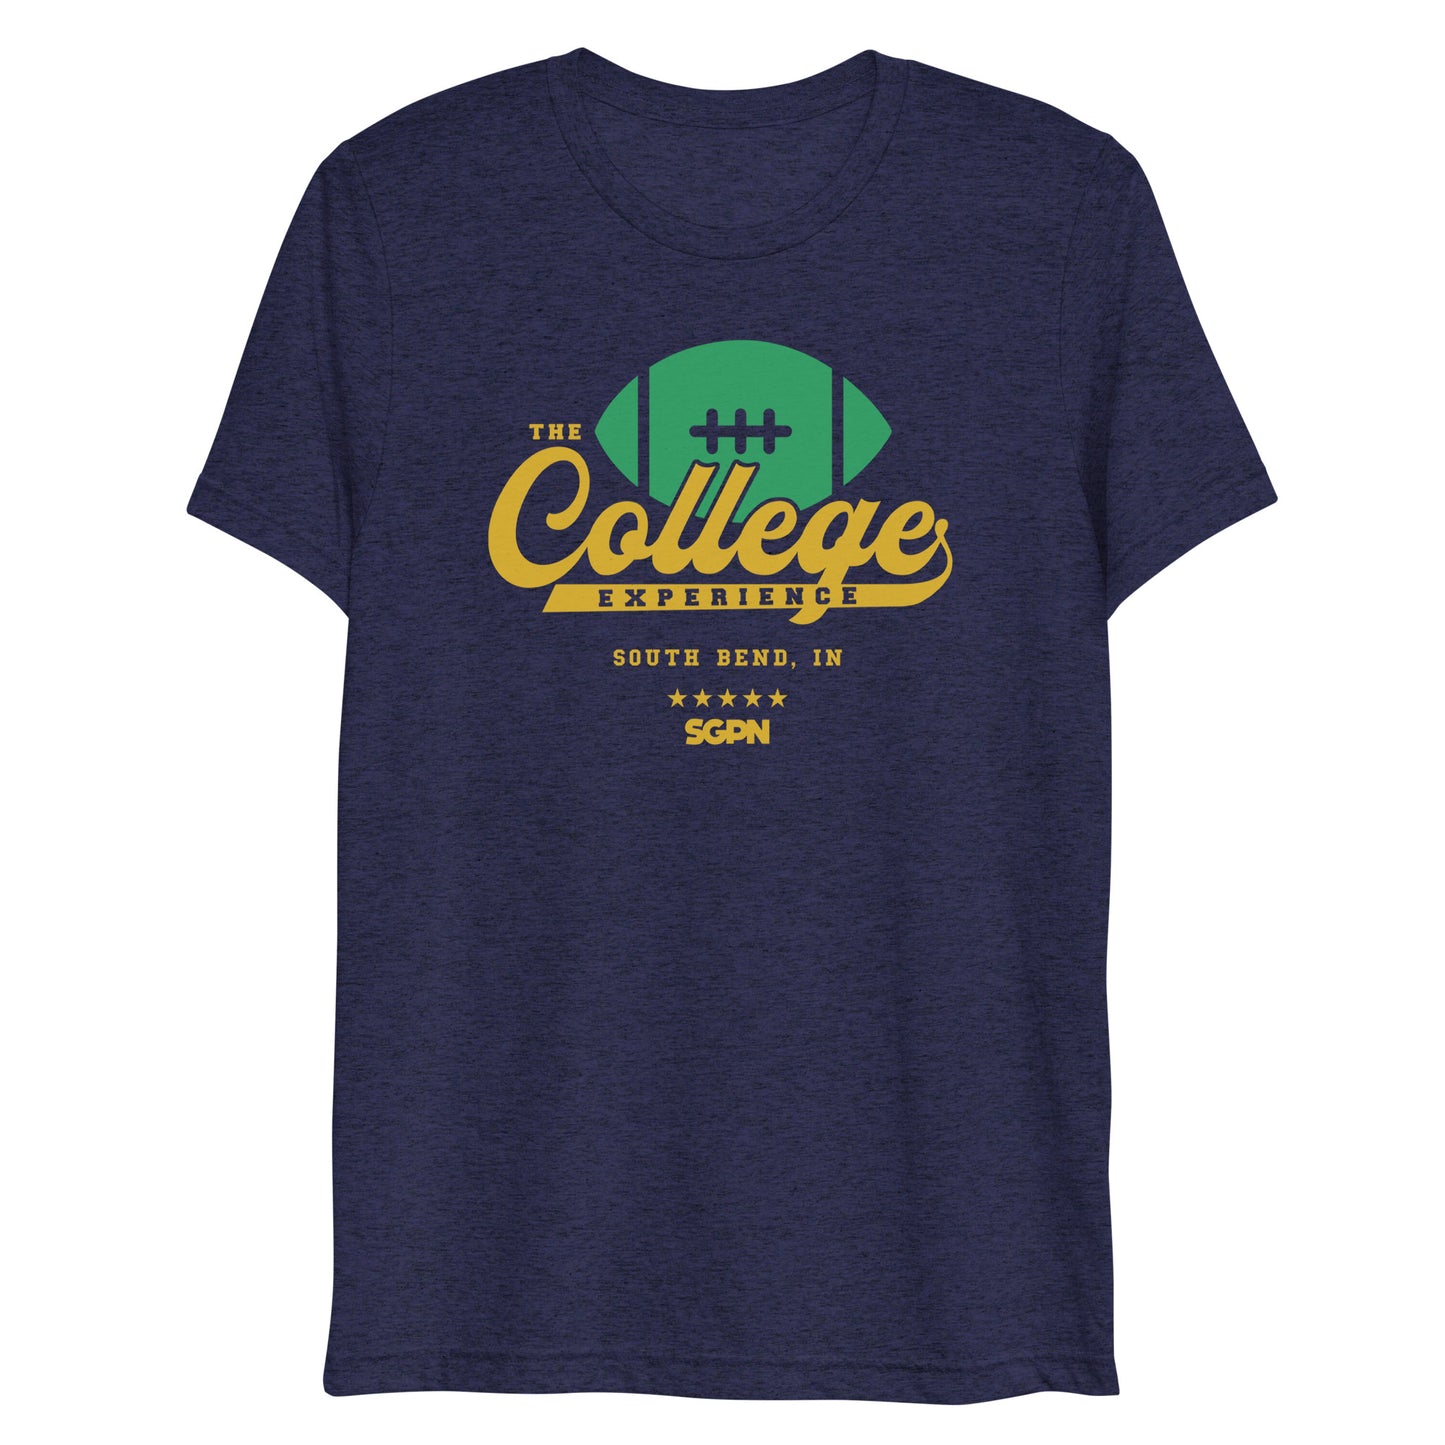 The College Football Experience - South Bend edition - Navy Short sleeve t-shirt